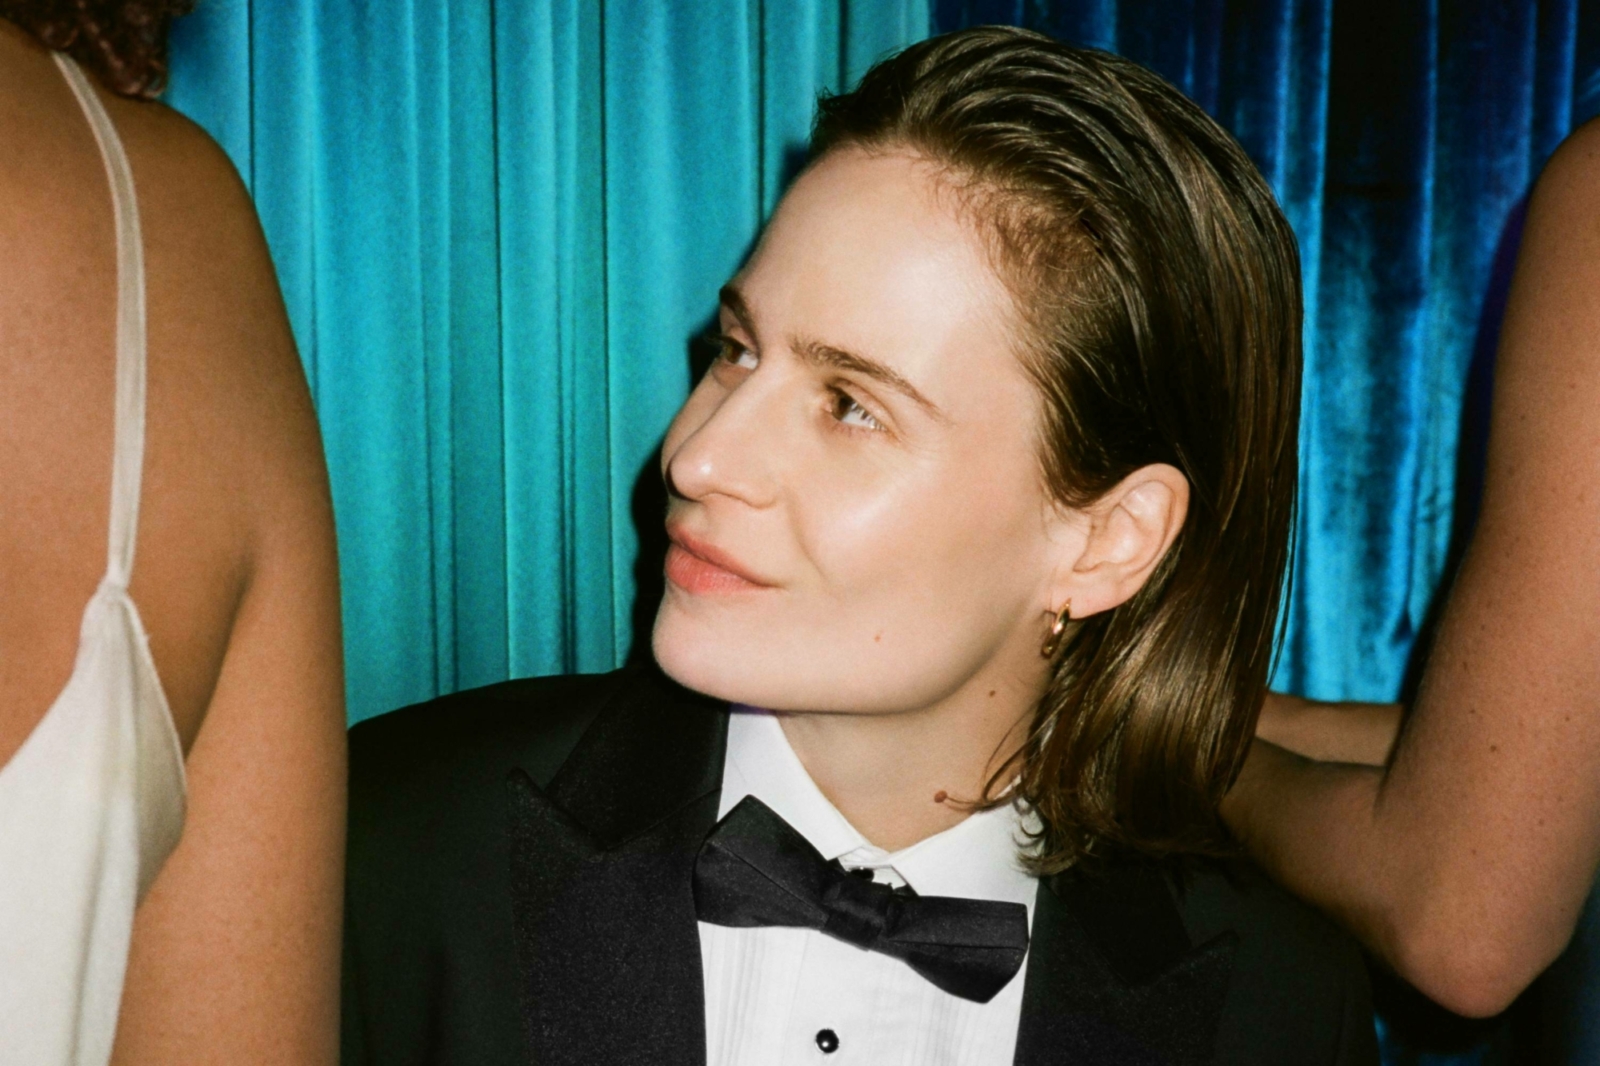 Christine and The Queens, Fatboy Slim and The Chemical Brothers are headlining Wilderness Festival